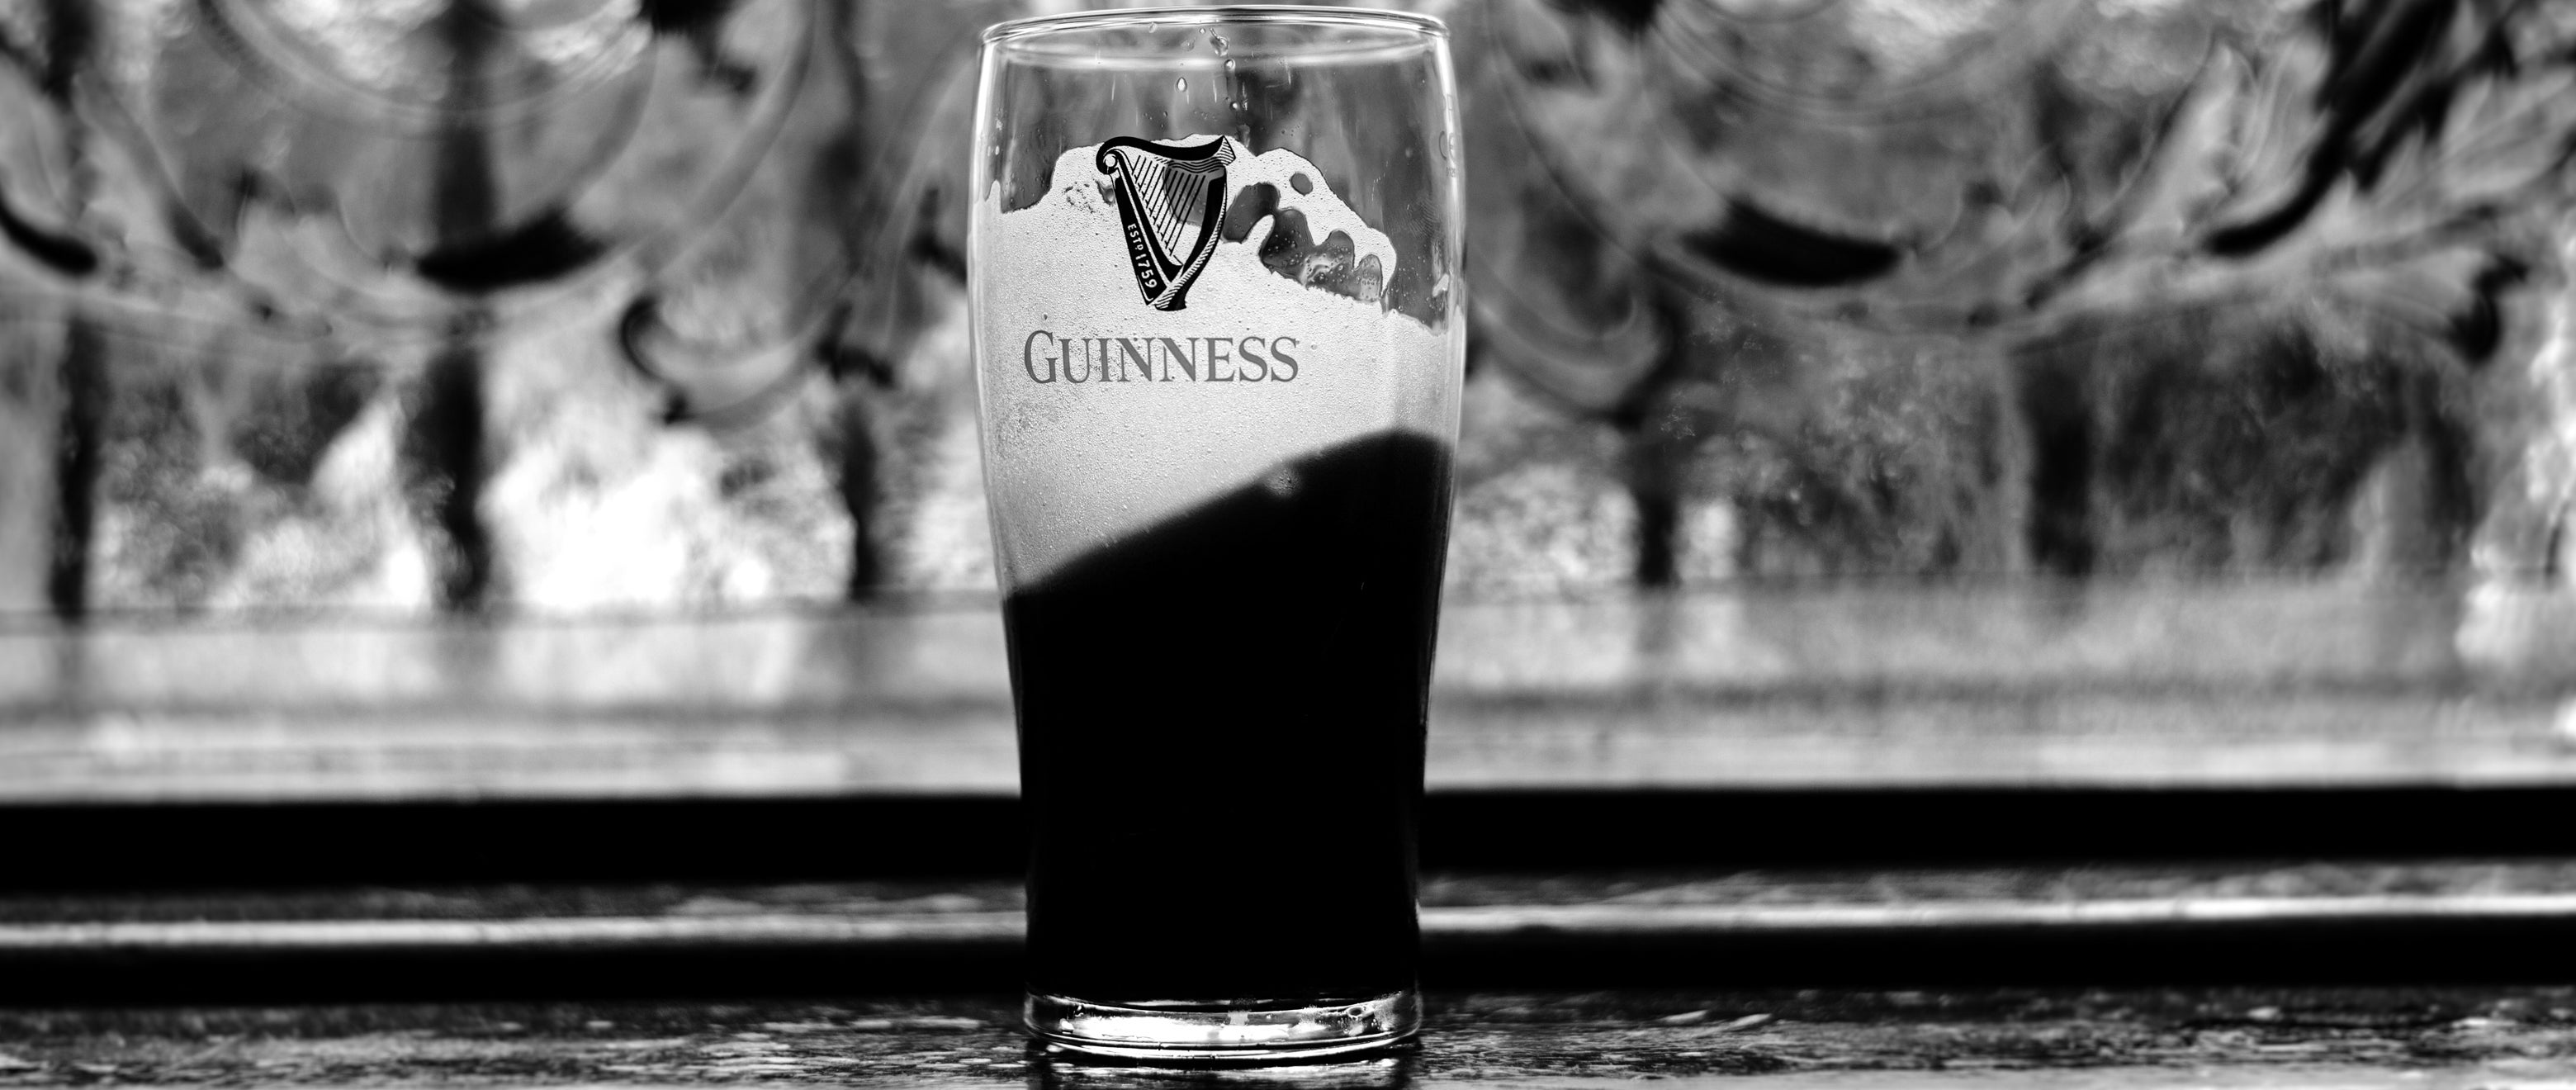 Stout beer - Guinness